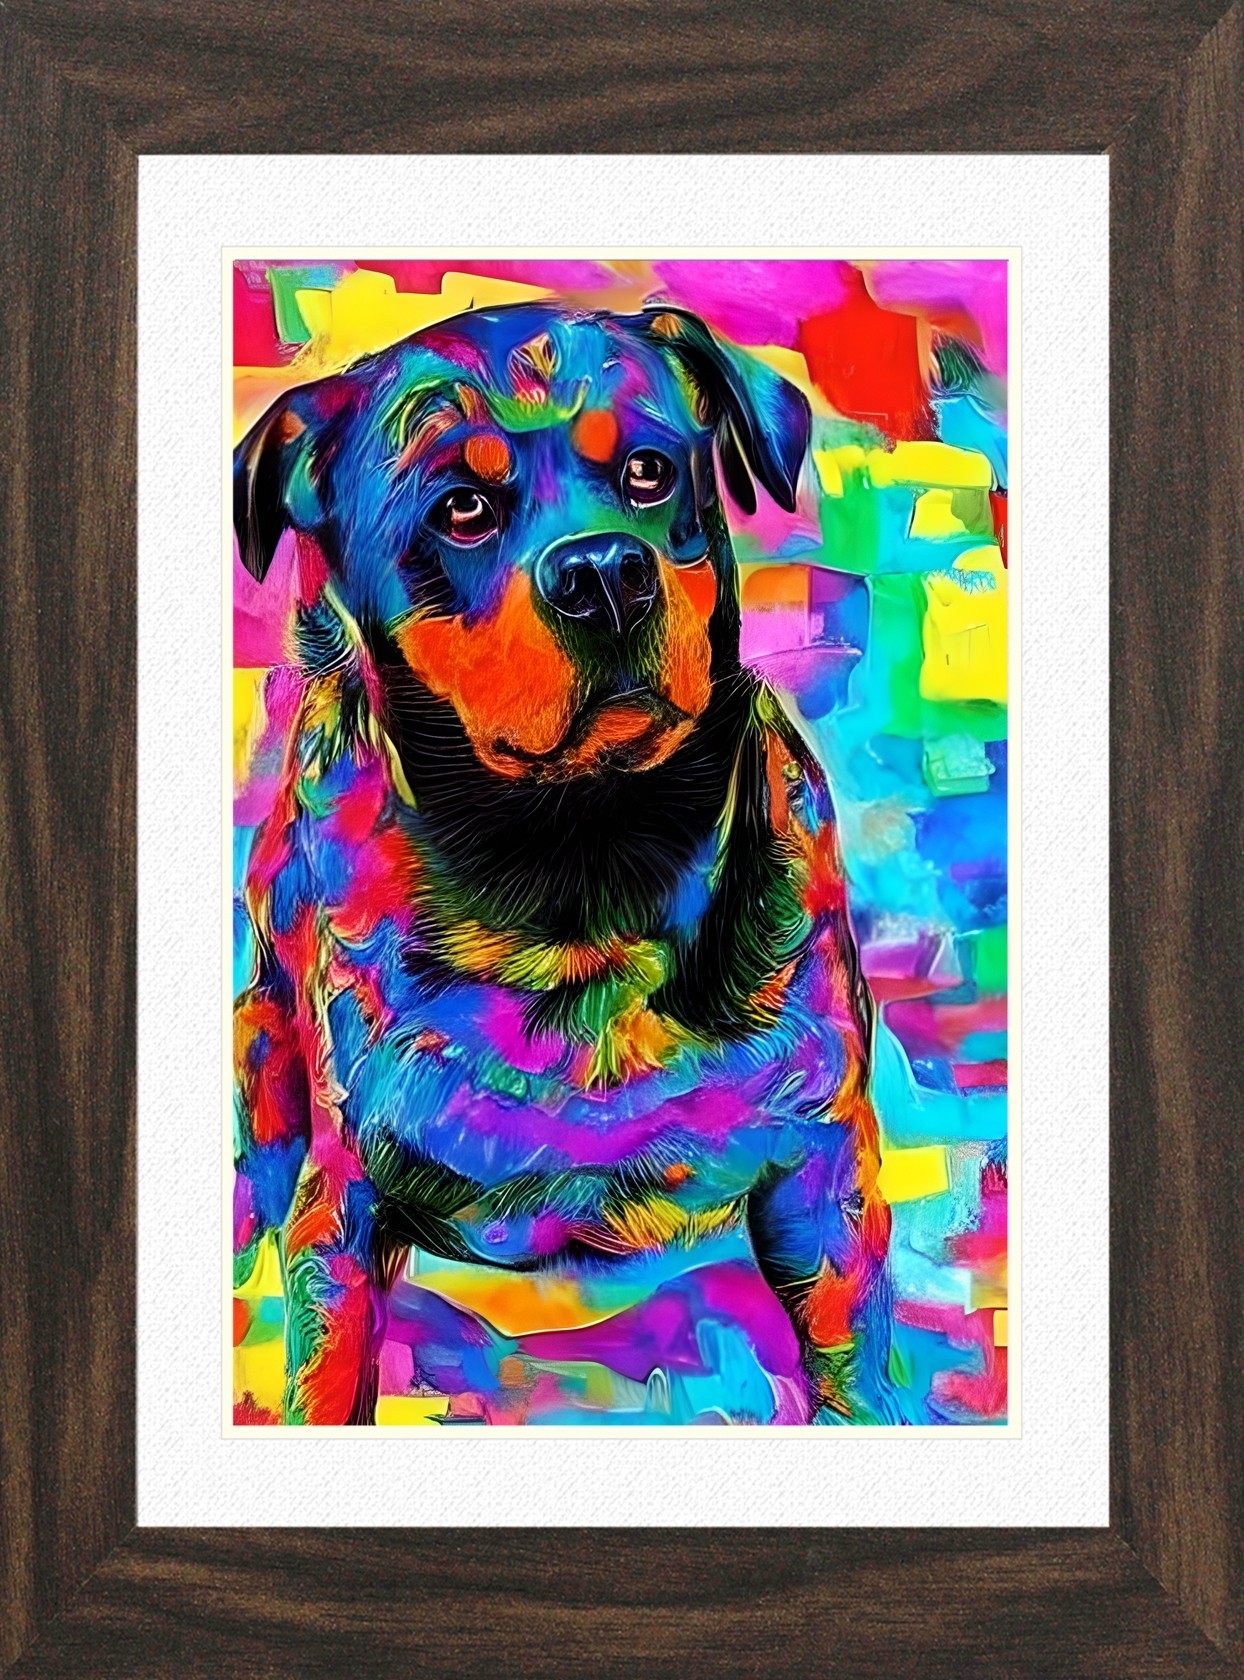 Rottweiler Dog Picture Framed Colourful Abstract Art (25cm x 20cm Walnut Frame)